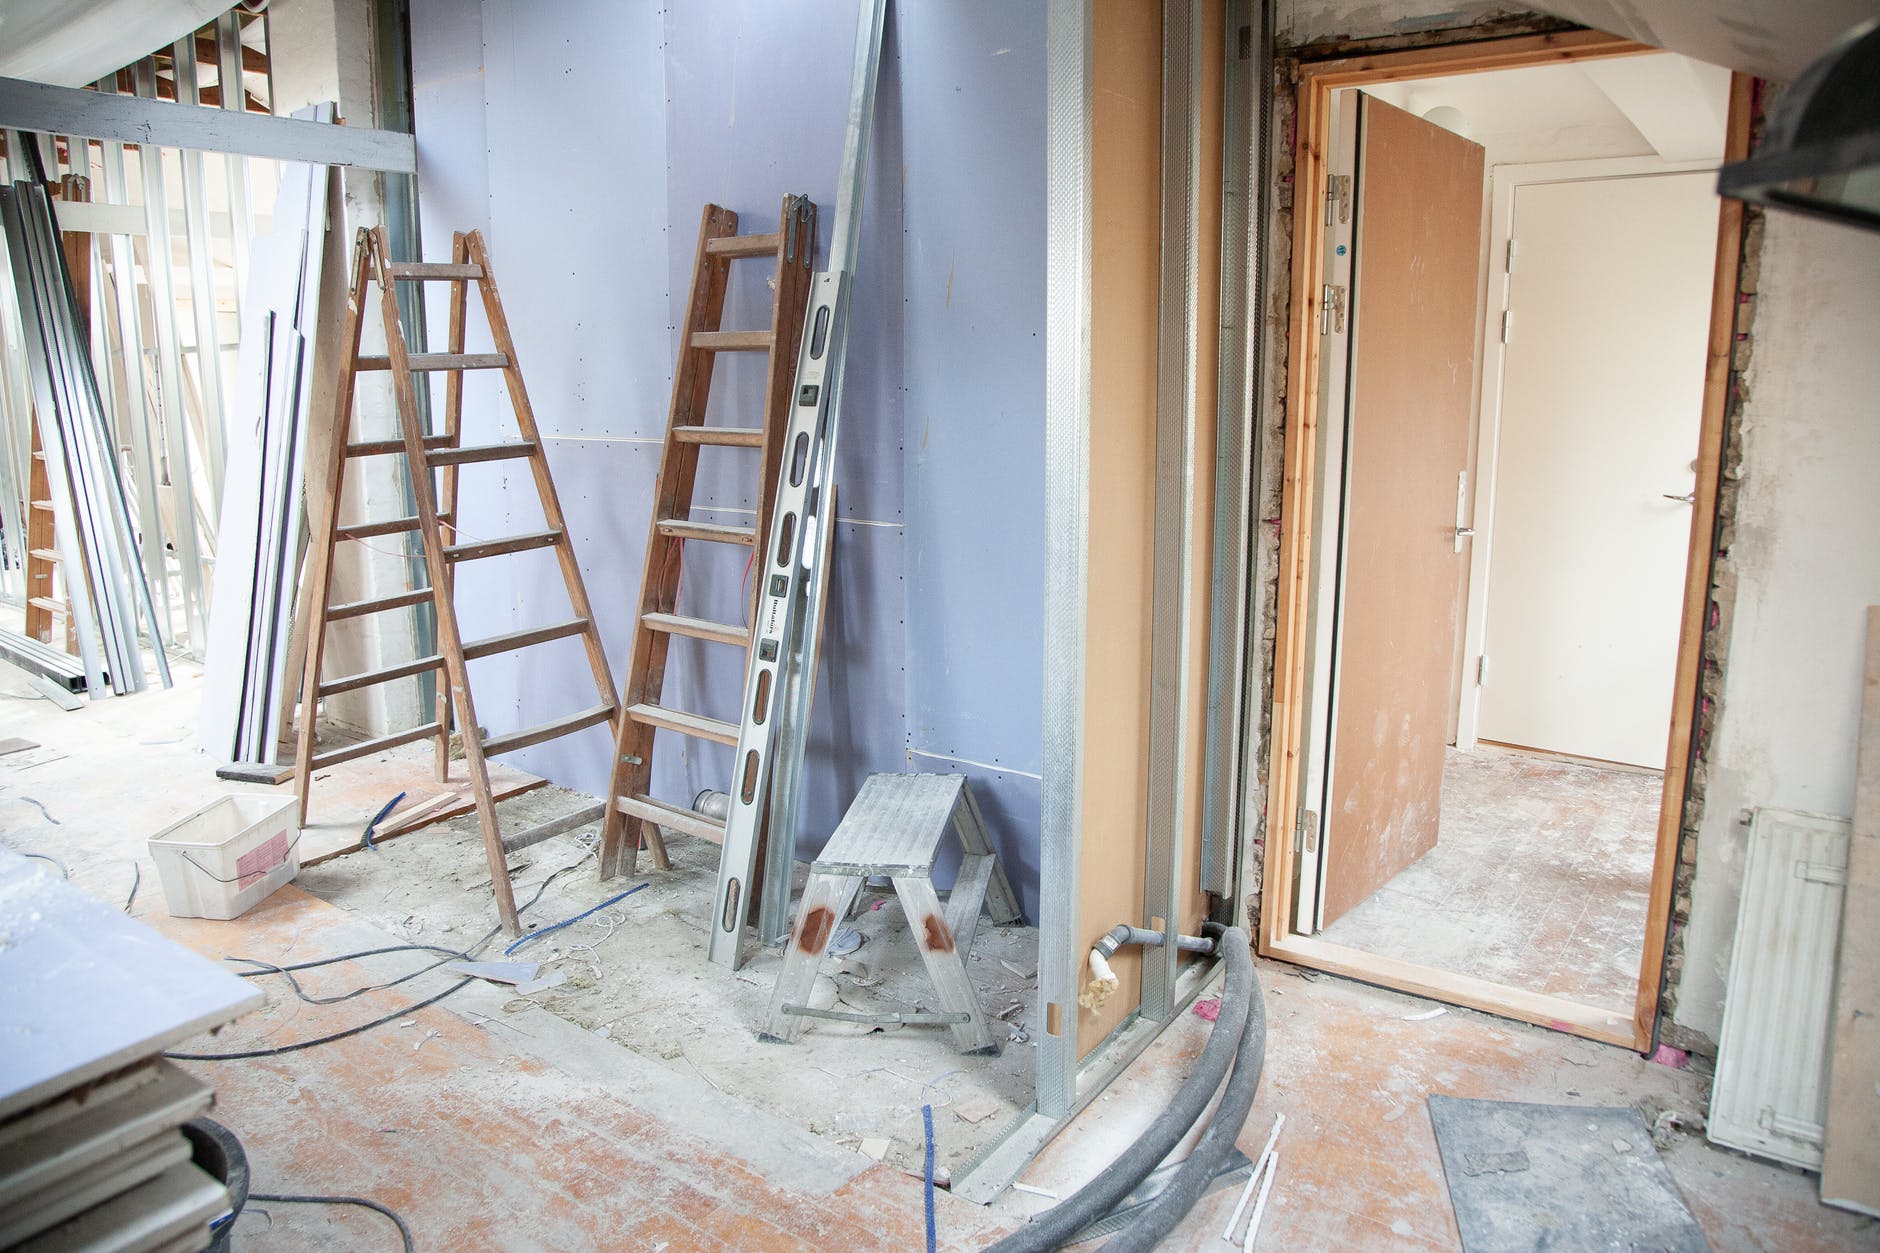 Home renovation and Improvement is a fantastic fit for those that want to increase the resale value, as well as create a cozy home filled to the brim with memories.